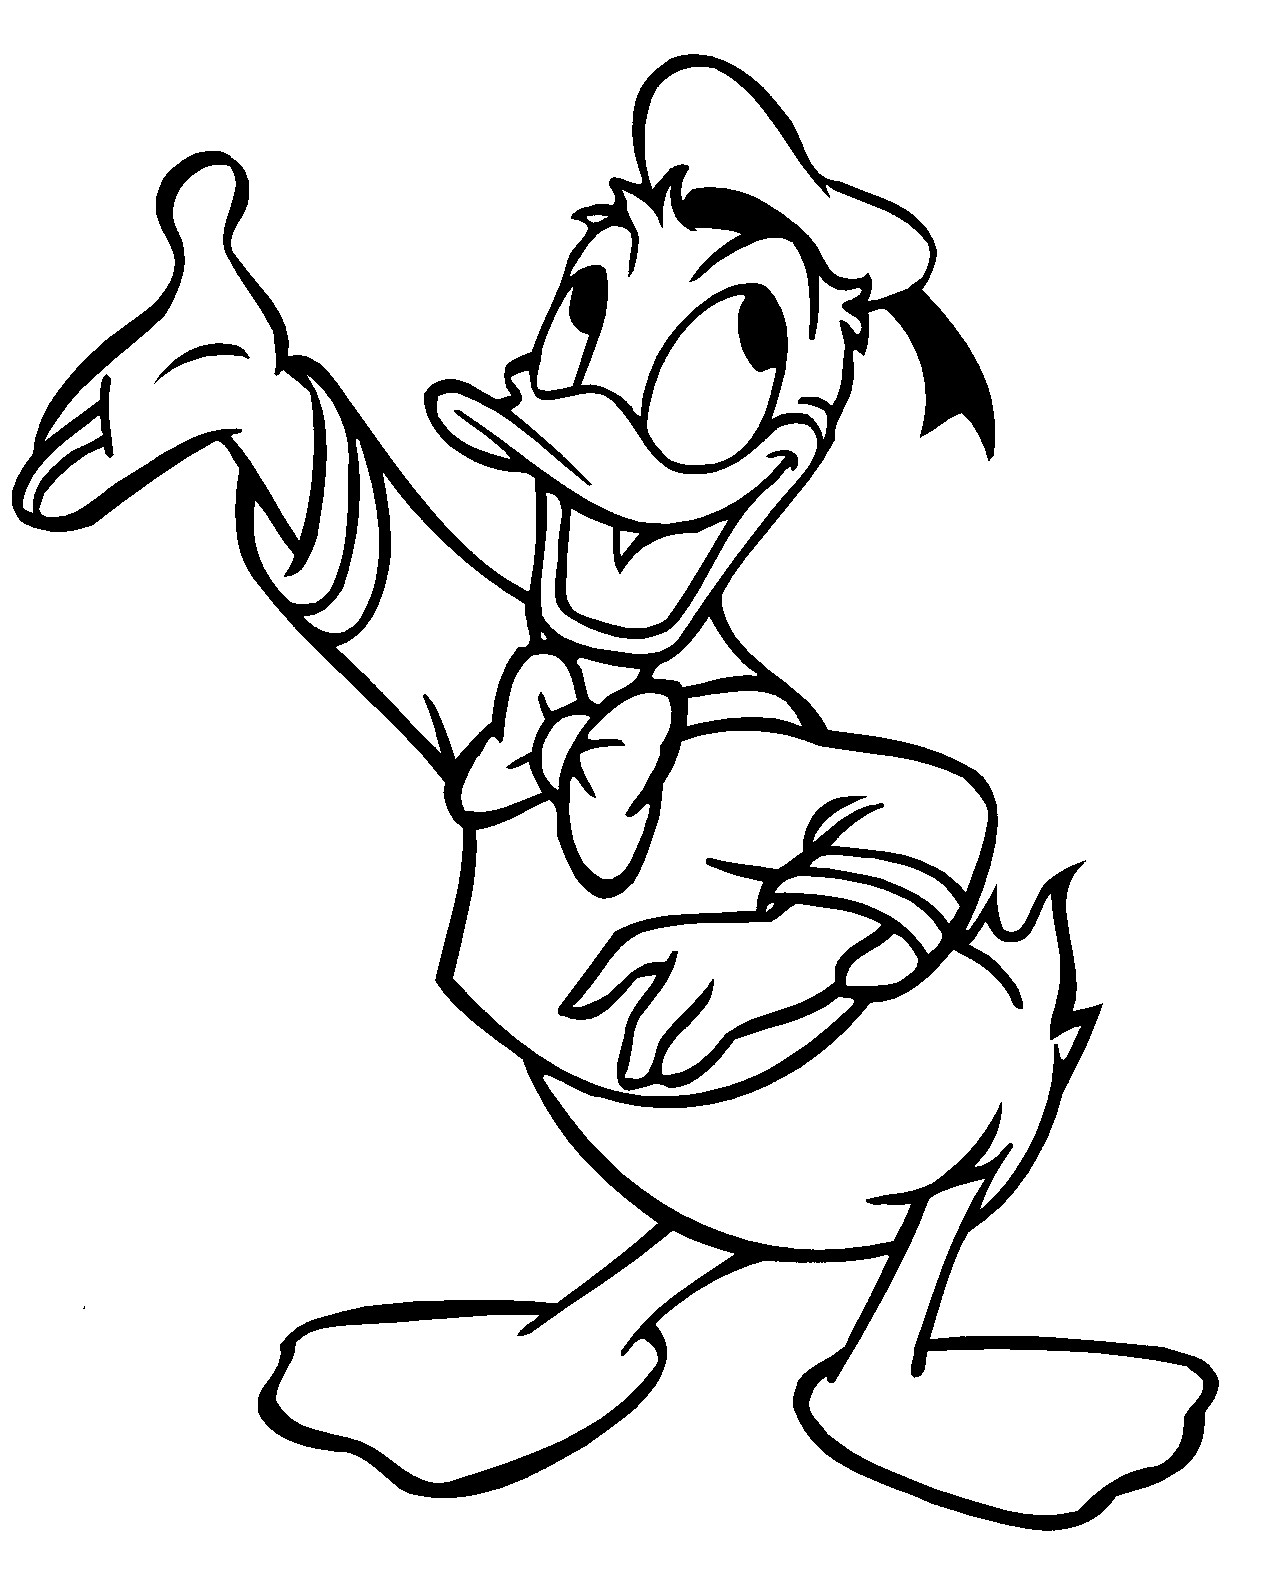 Free Coloring Pages No Printing
 Free Printable Donald Duck Coloring Pages For Kids